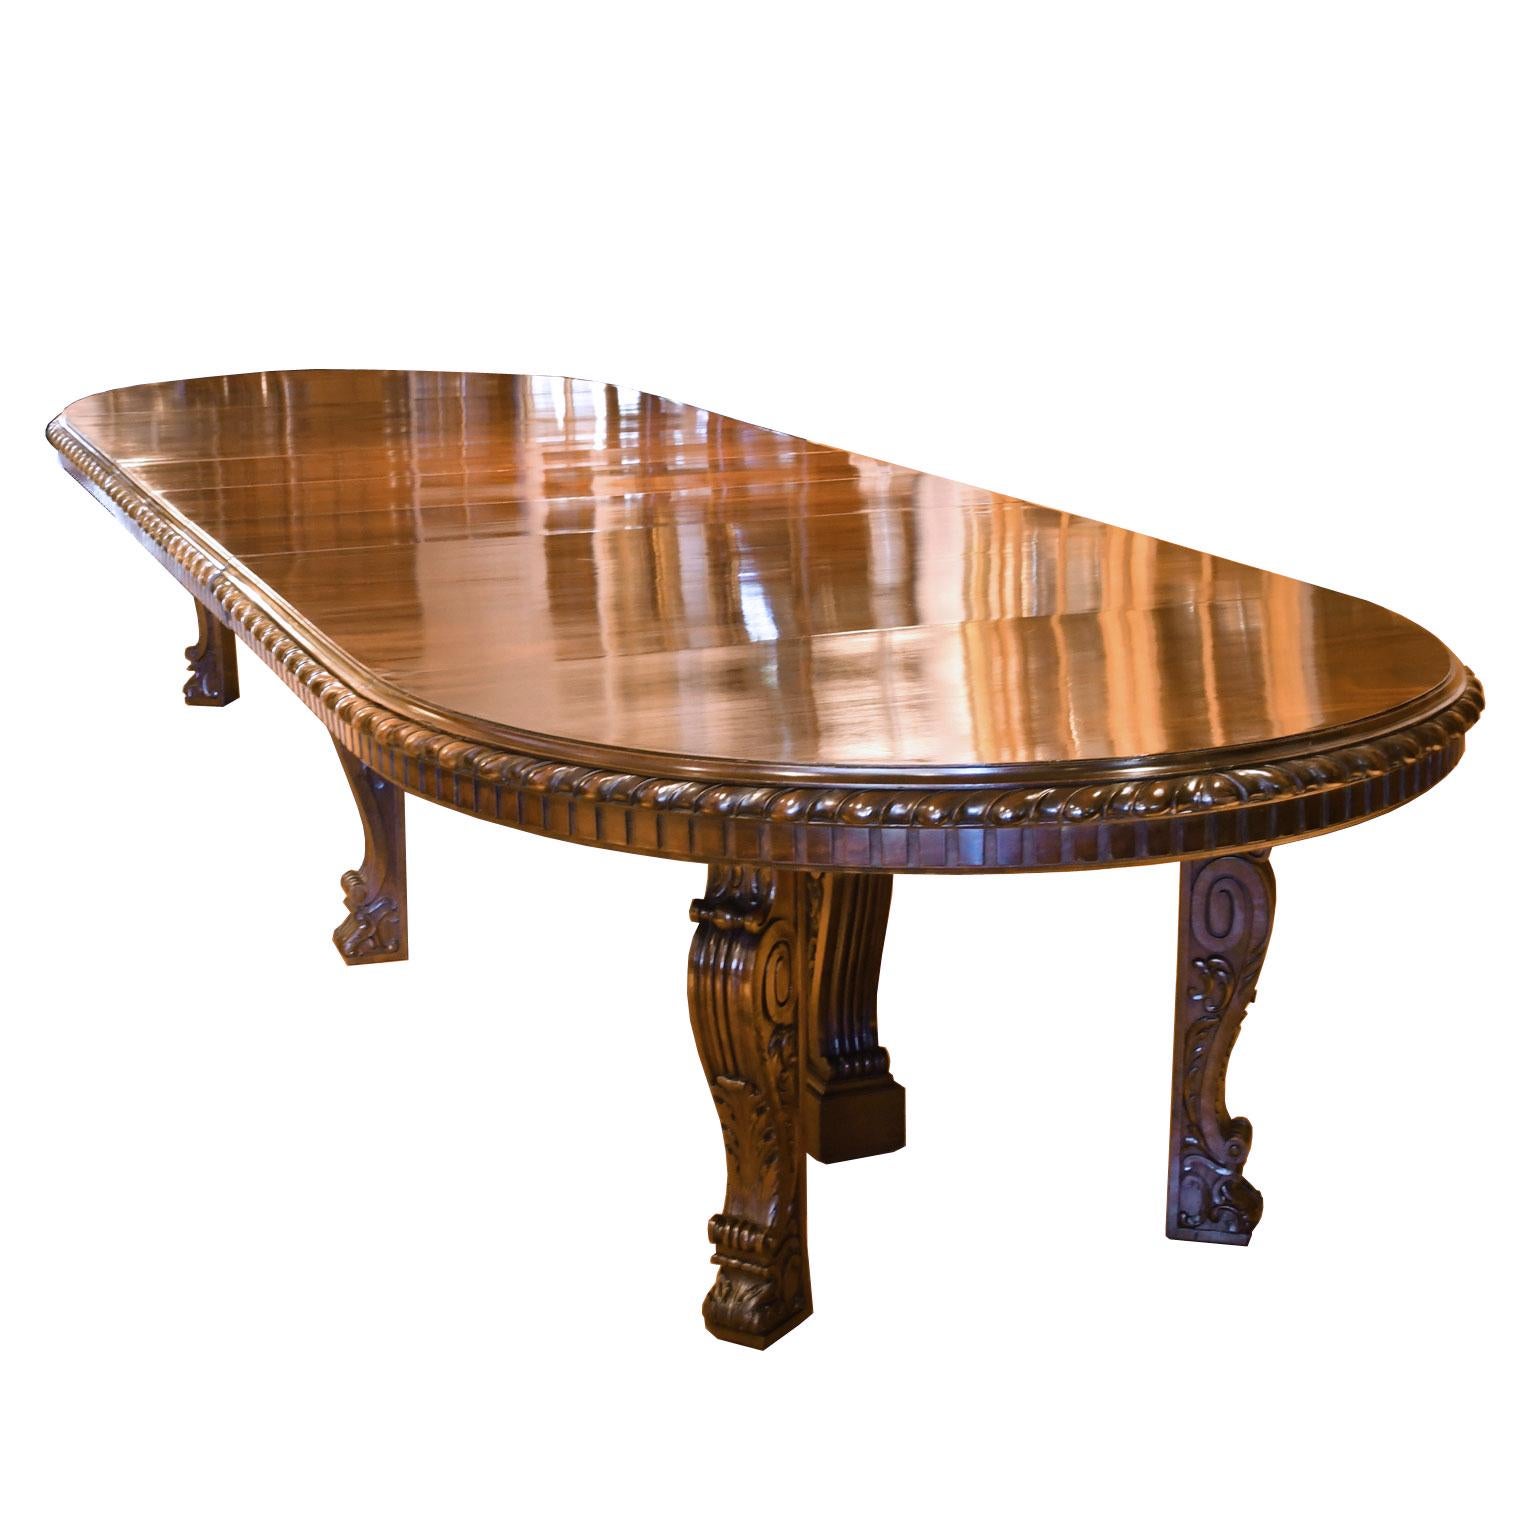 From the American Gilded Age, a magnificent extension dining table that measures 11 feet 10 inches at its smallest and opens to 19 feet 9 inches when fully extended. Made of a fine close-grain solid West Indies mahogany, it has well-articulated